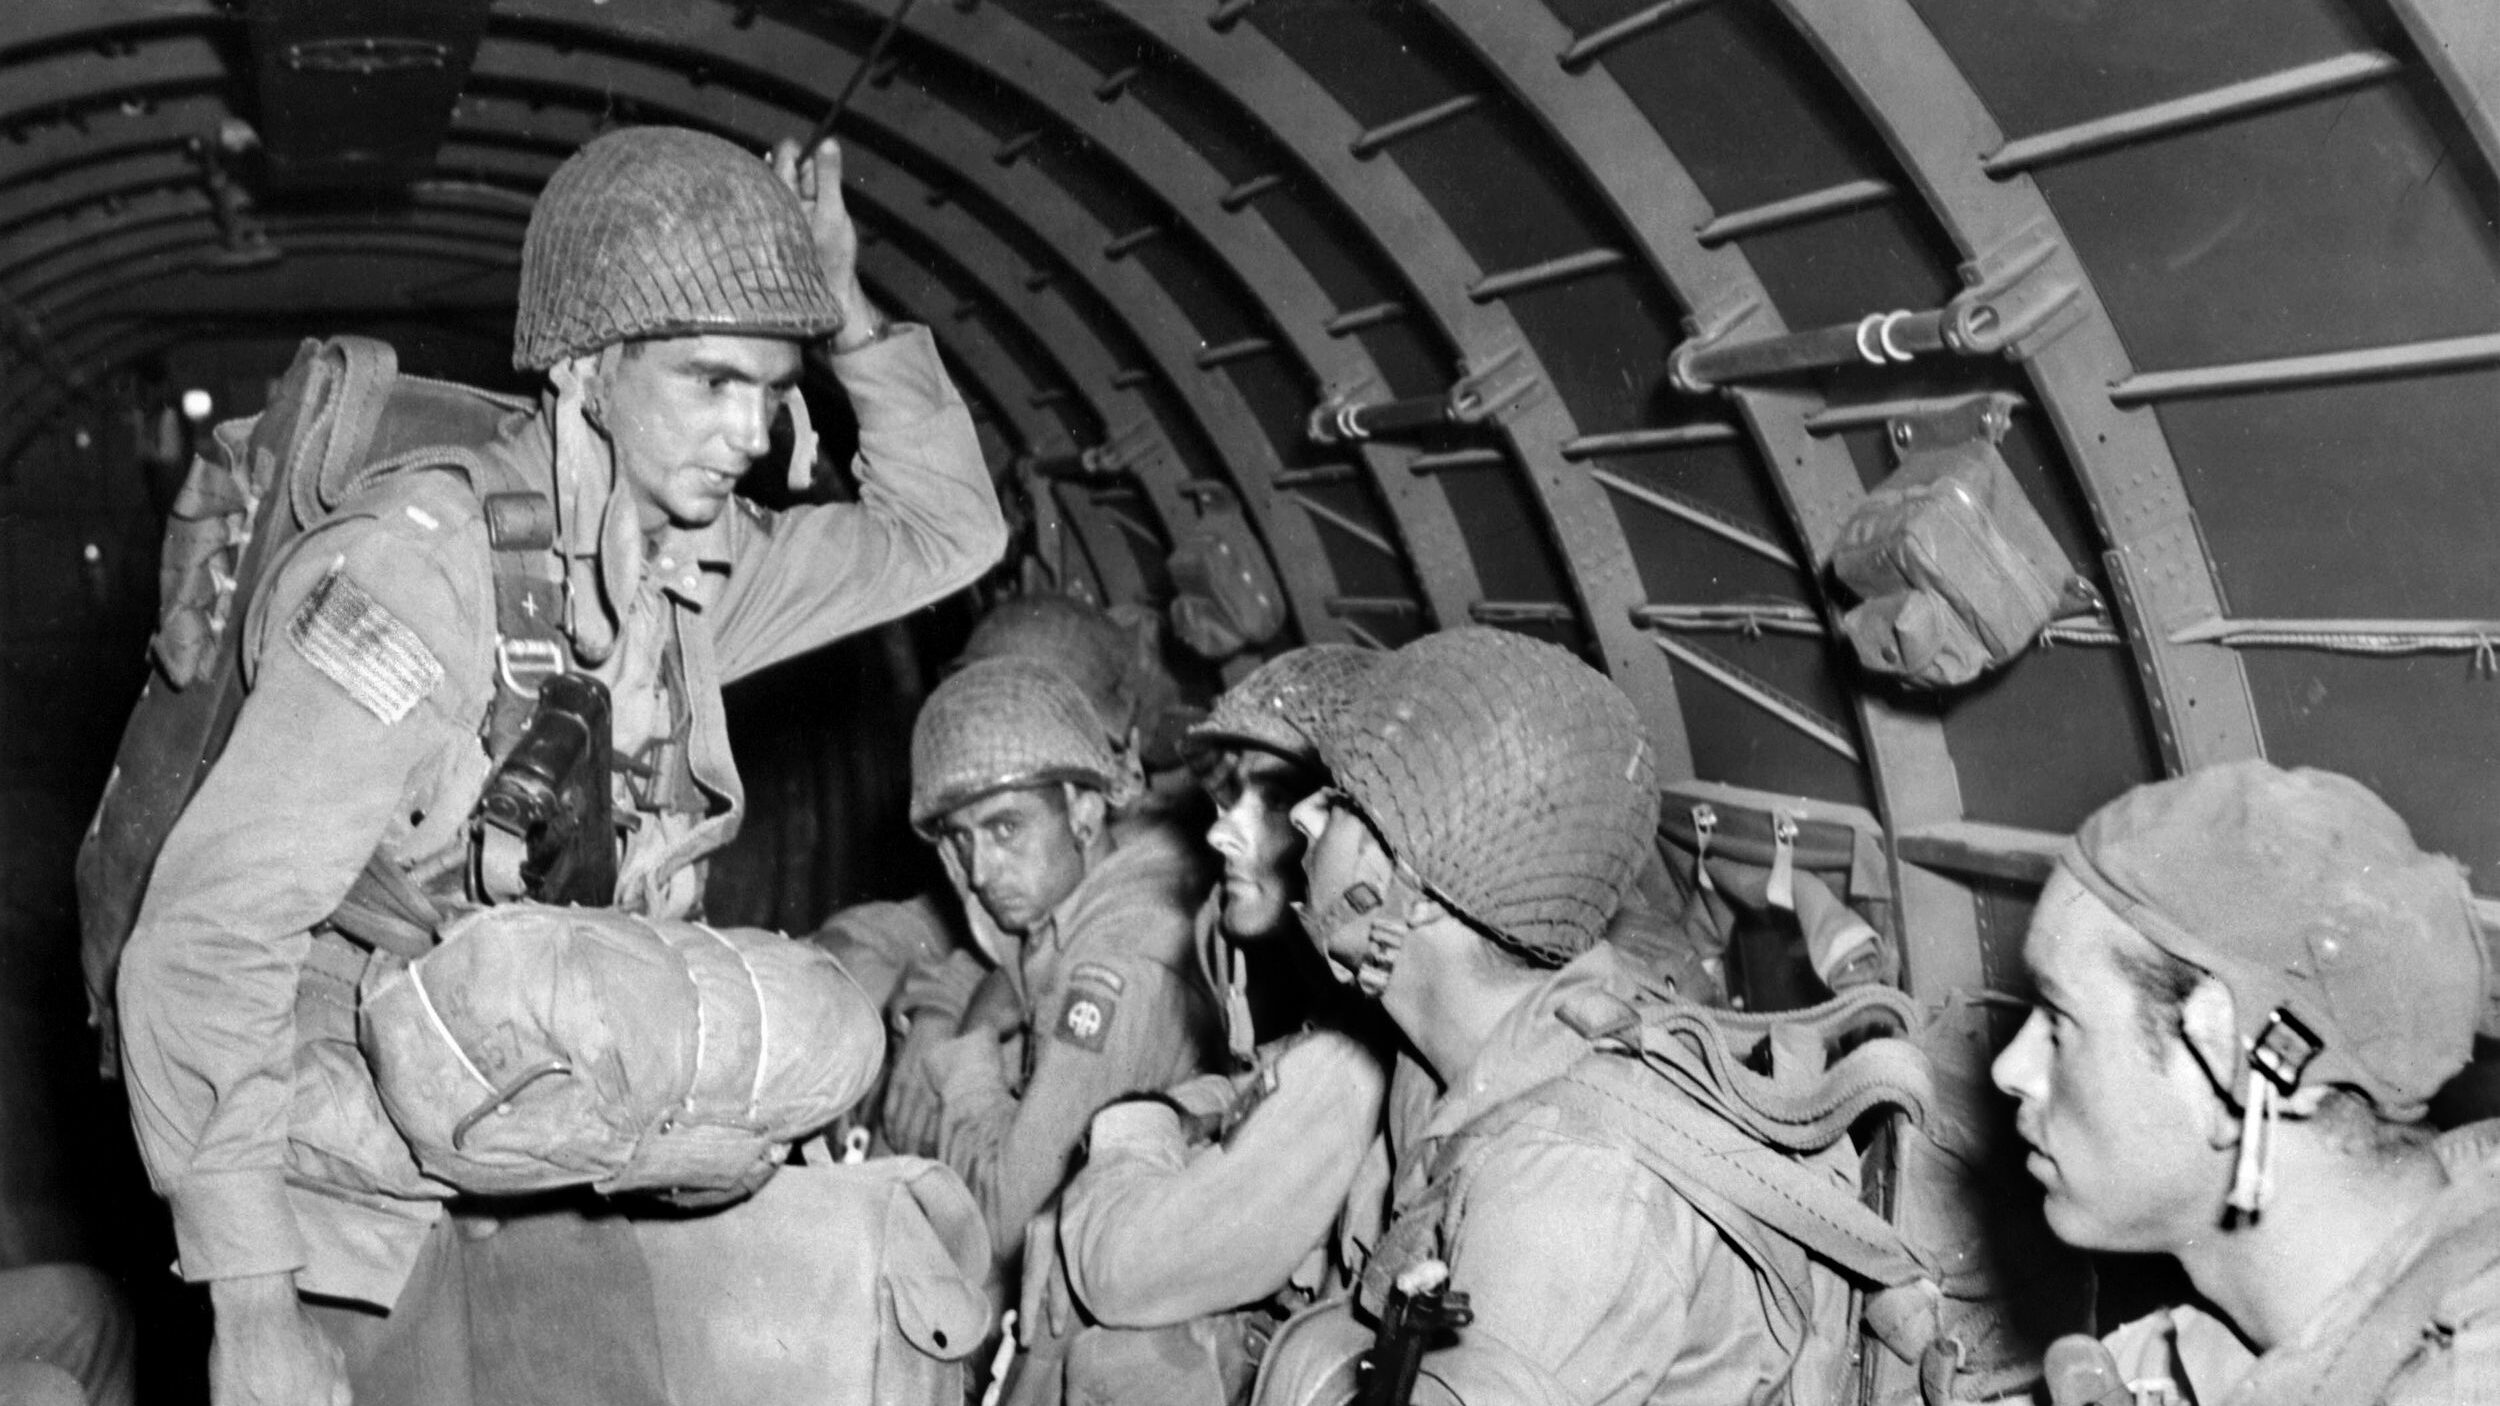 Paratroopers of the 82nd Airborne Division ride aboard a transport aircraft en route to their drop zones near the Salerno beachhead during the Allied invasion of the Italian mainland September 13-14, 1943. Members of the 504th and 505th Parachute Infantry Battalions were dropped to support the push inland. Members of the509th were deployed behind enemy lines to break up German communications at Avellino.